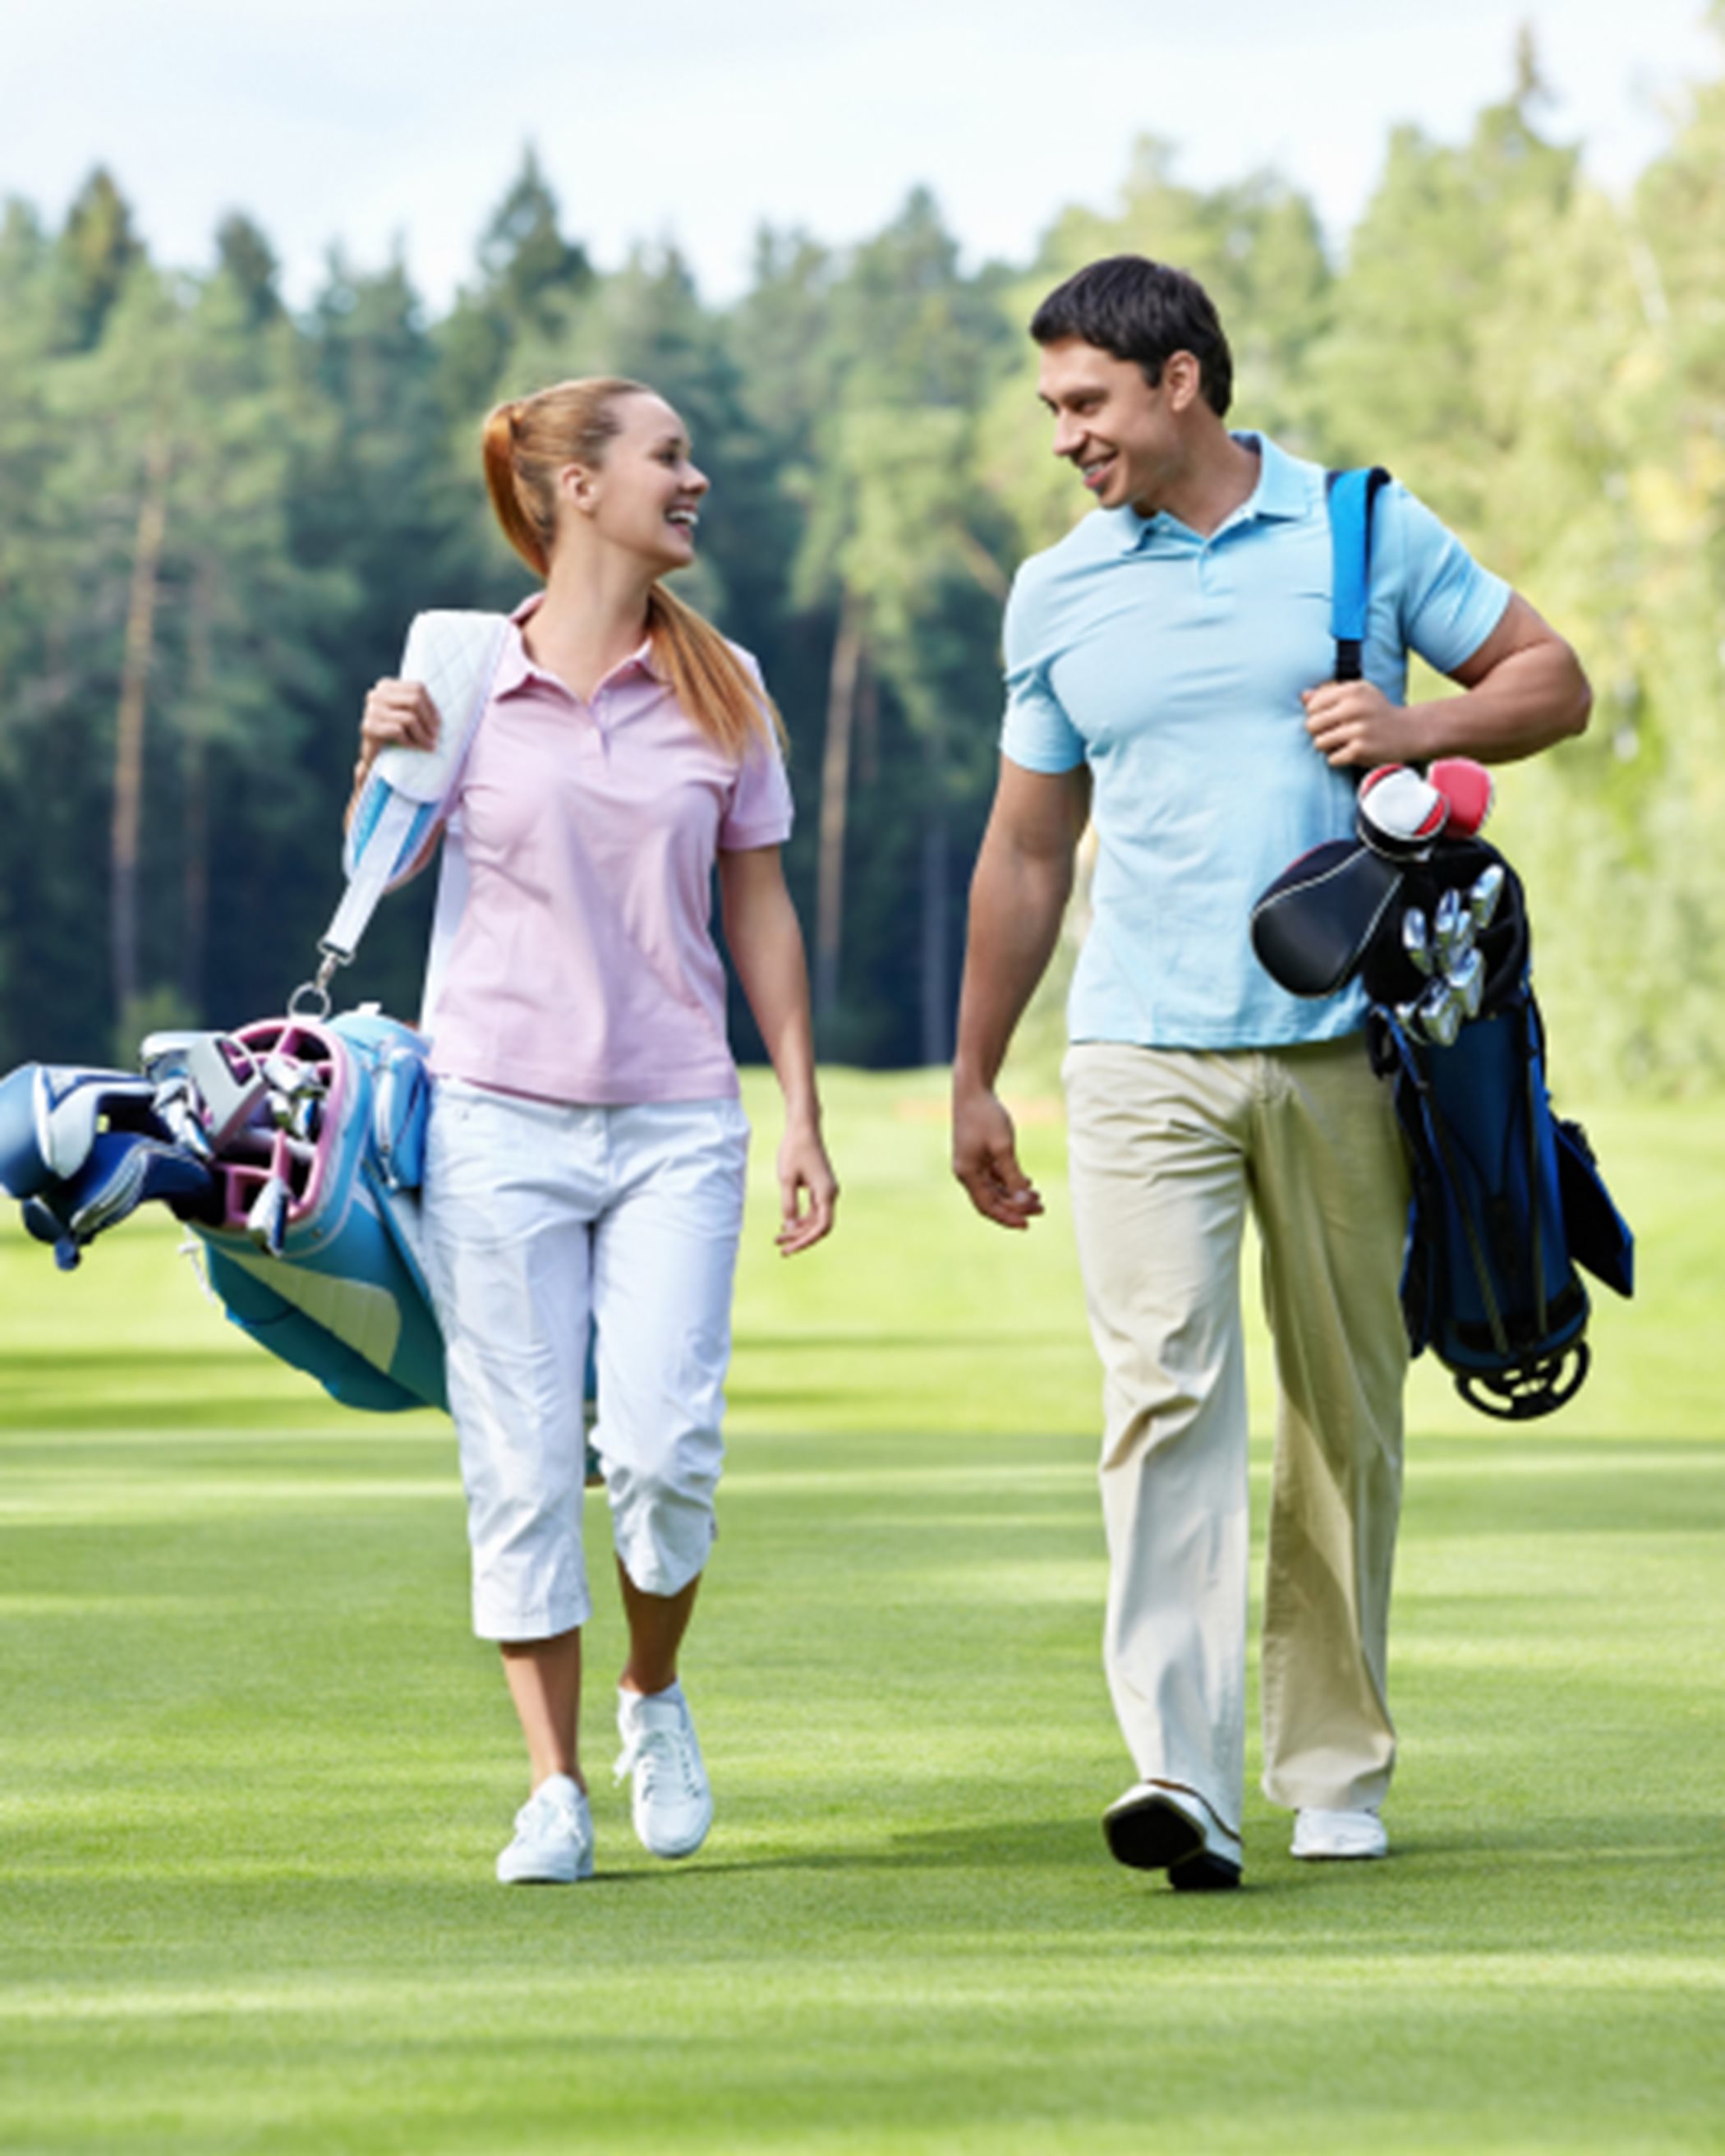 Two people walking on a golf course